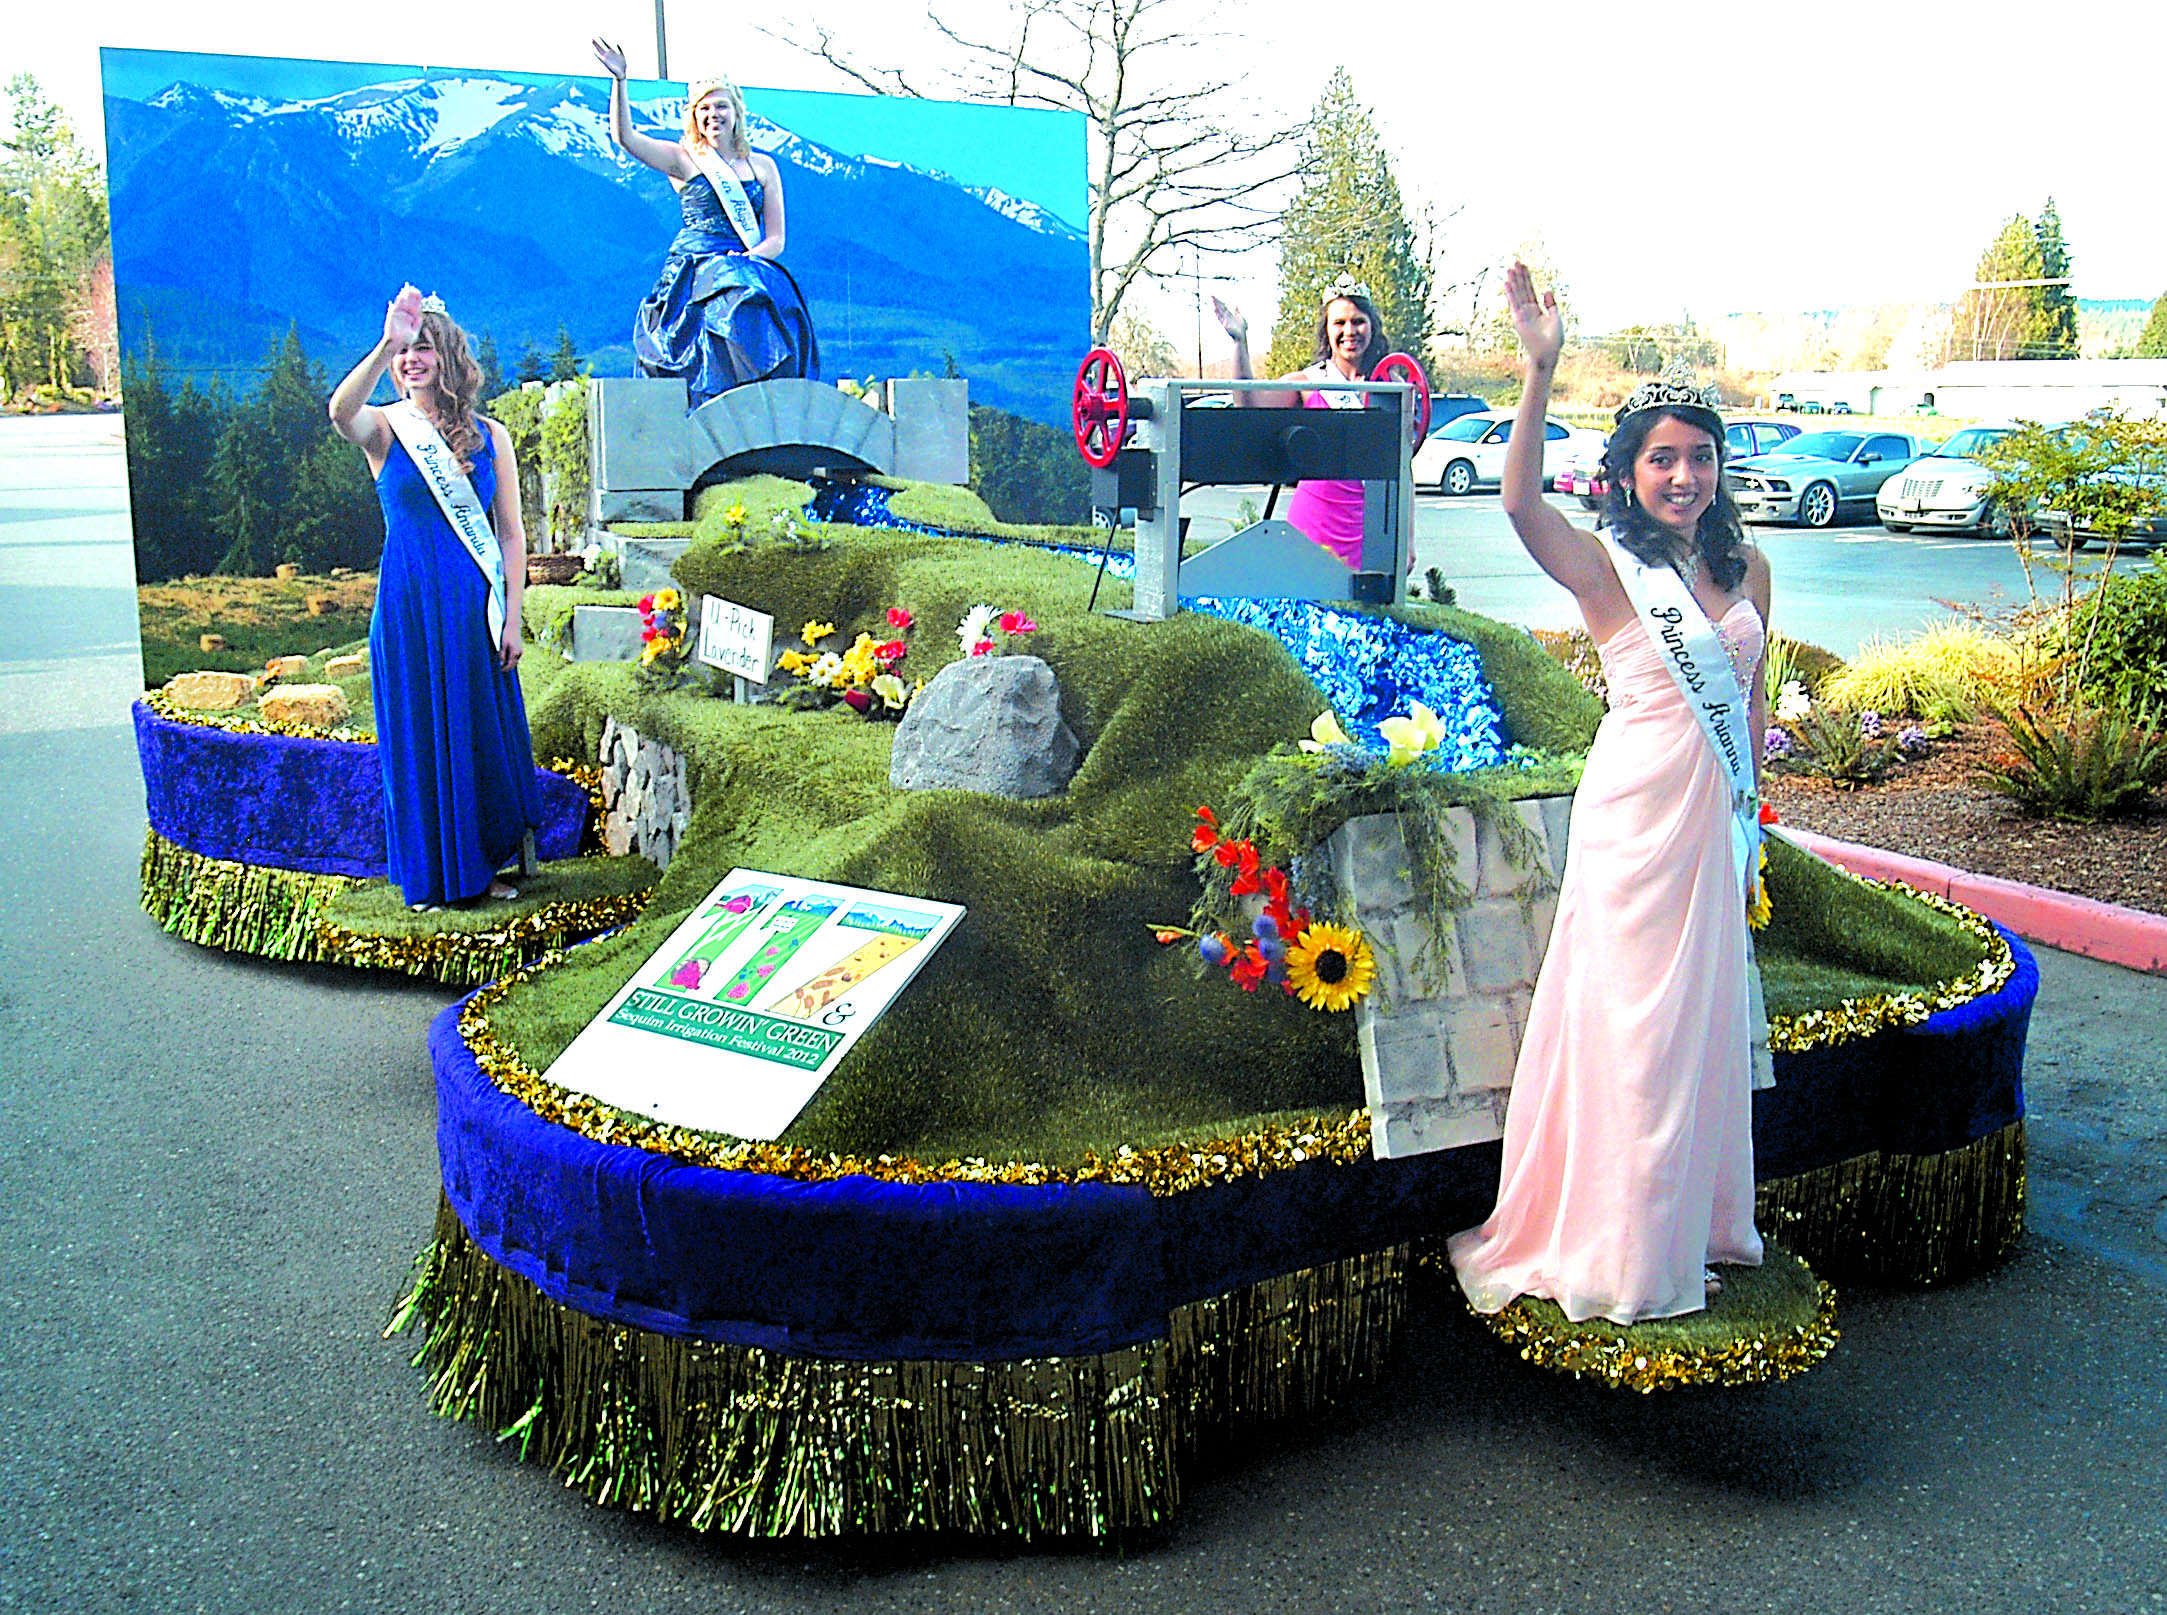 Sequim Irrigation Festival royalty debuted their float last month. Keith Thorpe/Peninsula Daily News